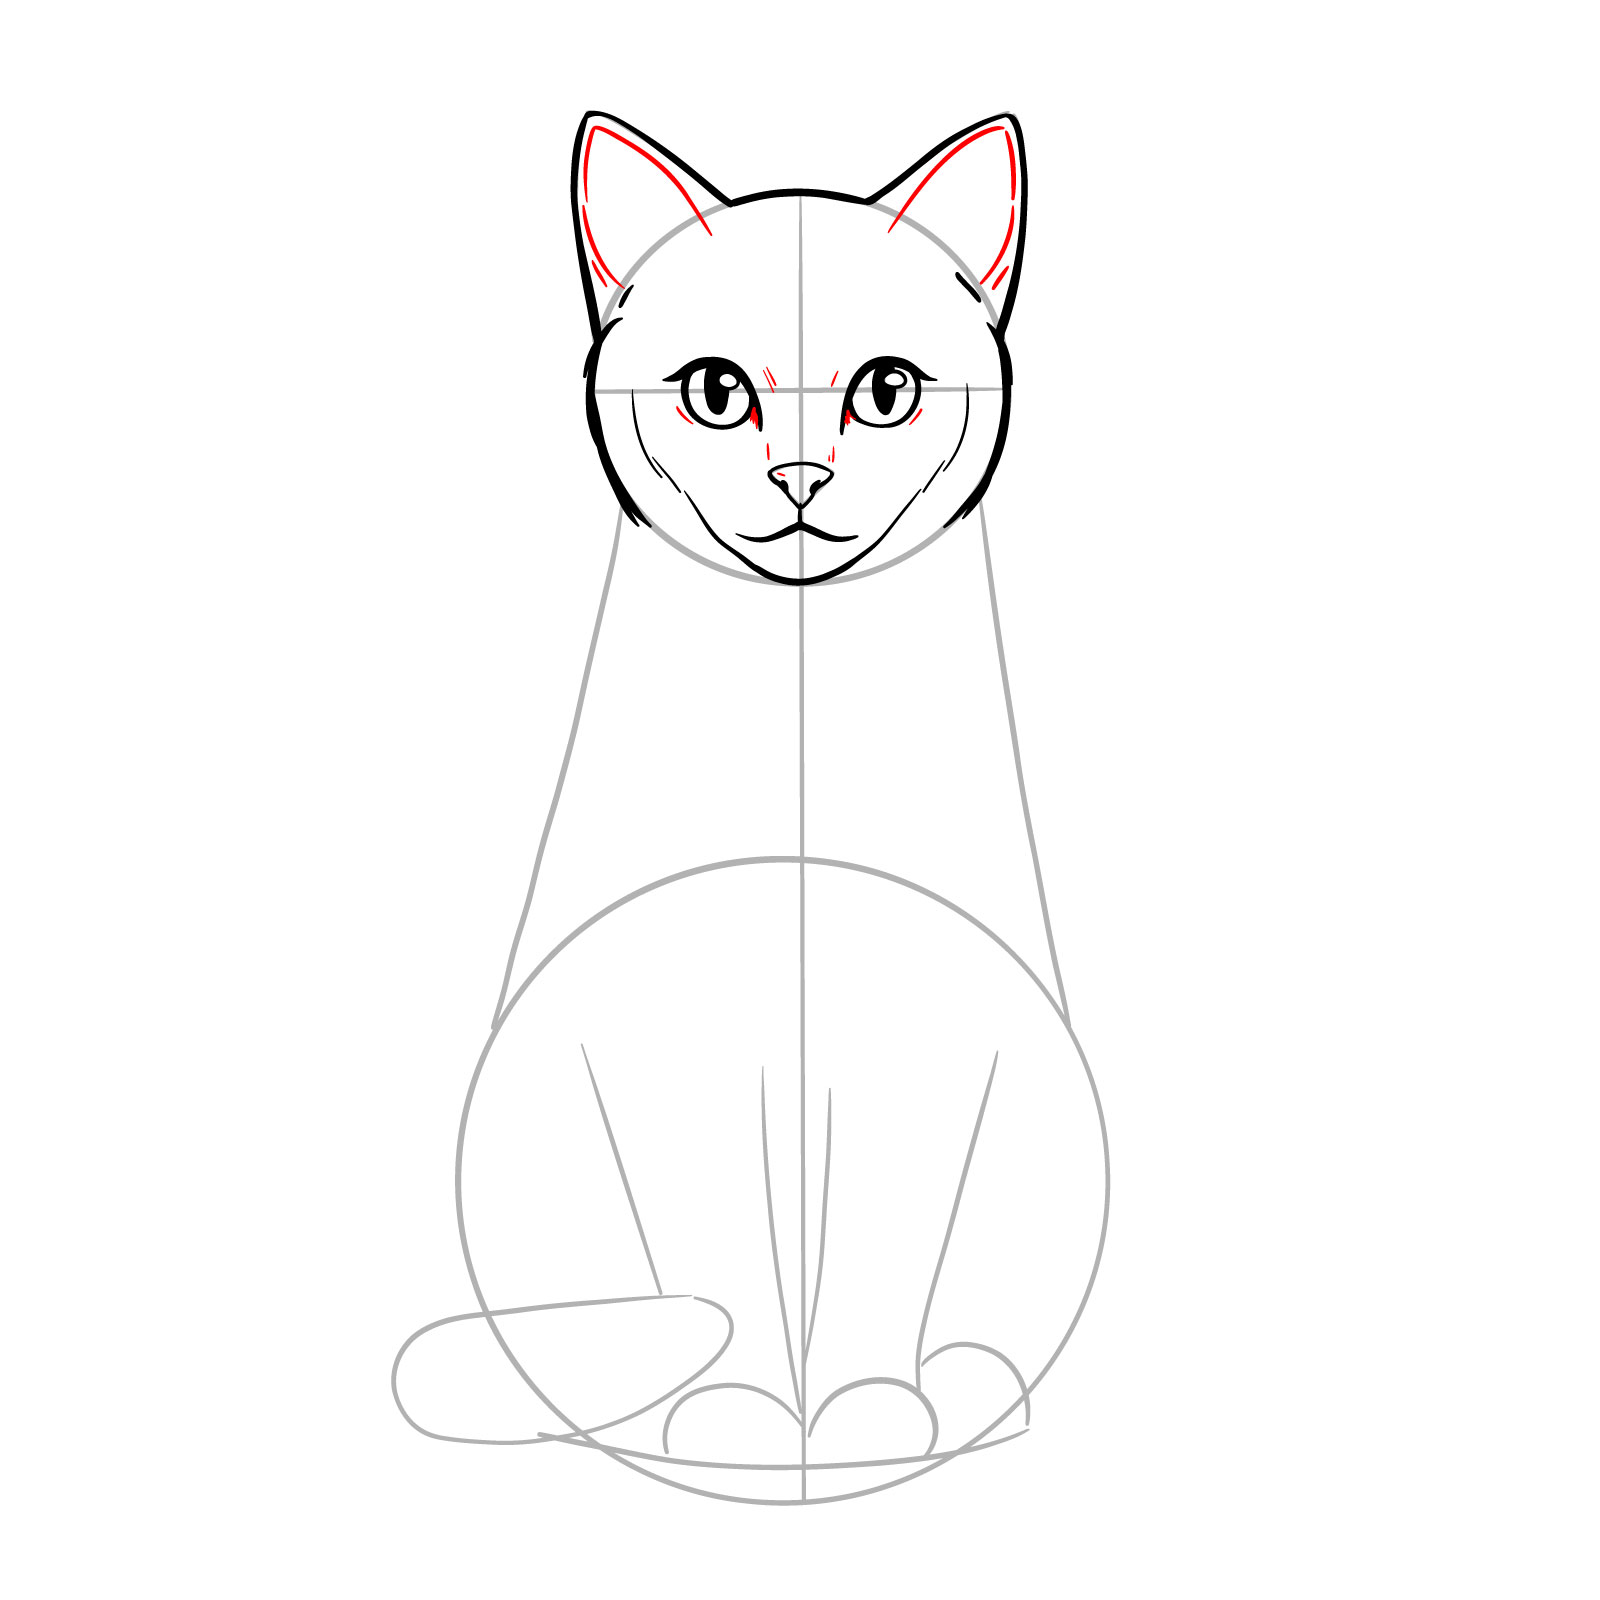 Detailing the eyes and inner ears in a sitting cat sketch - step 09